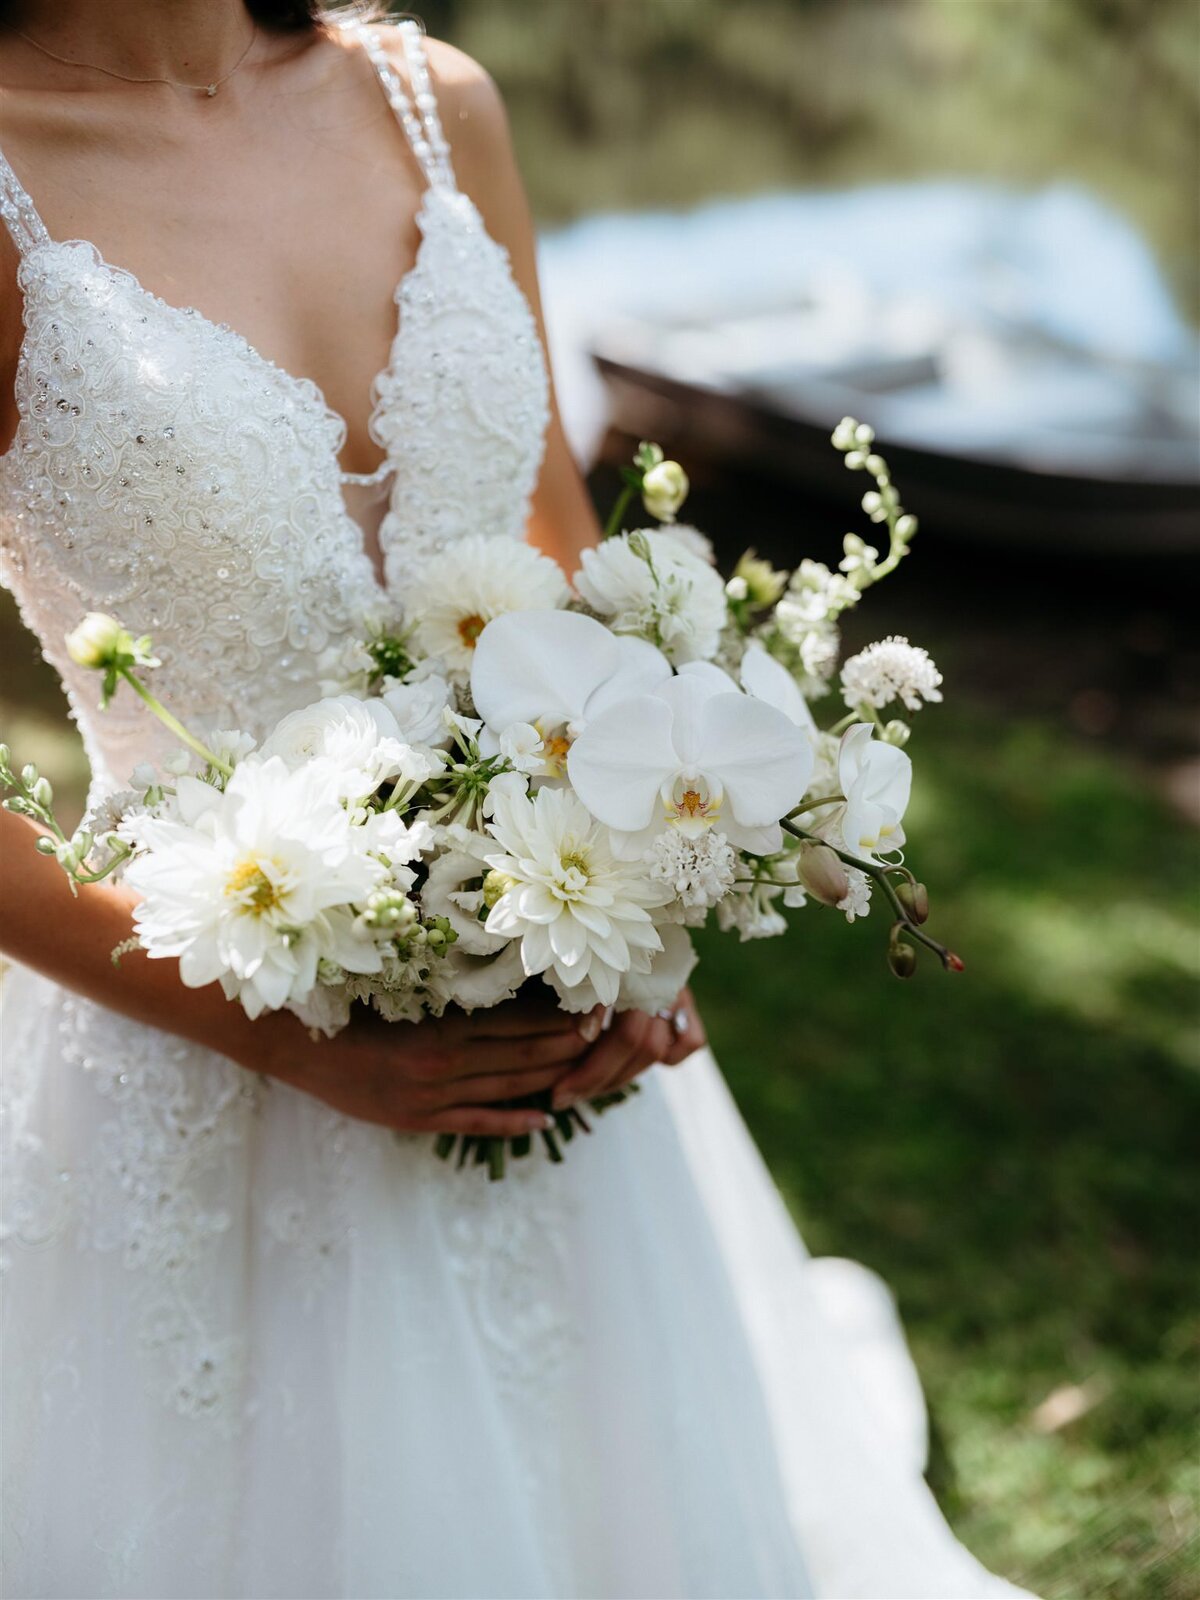 Detailed photo of bridal bouquet of white orchids, sparkly dress, and wooden rowboat in background.